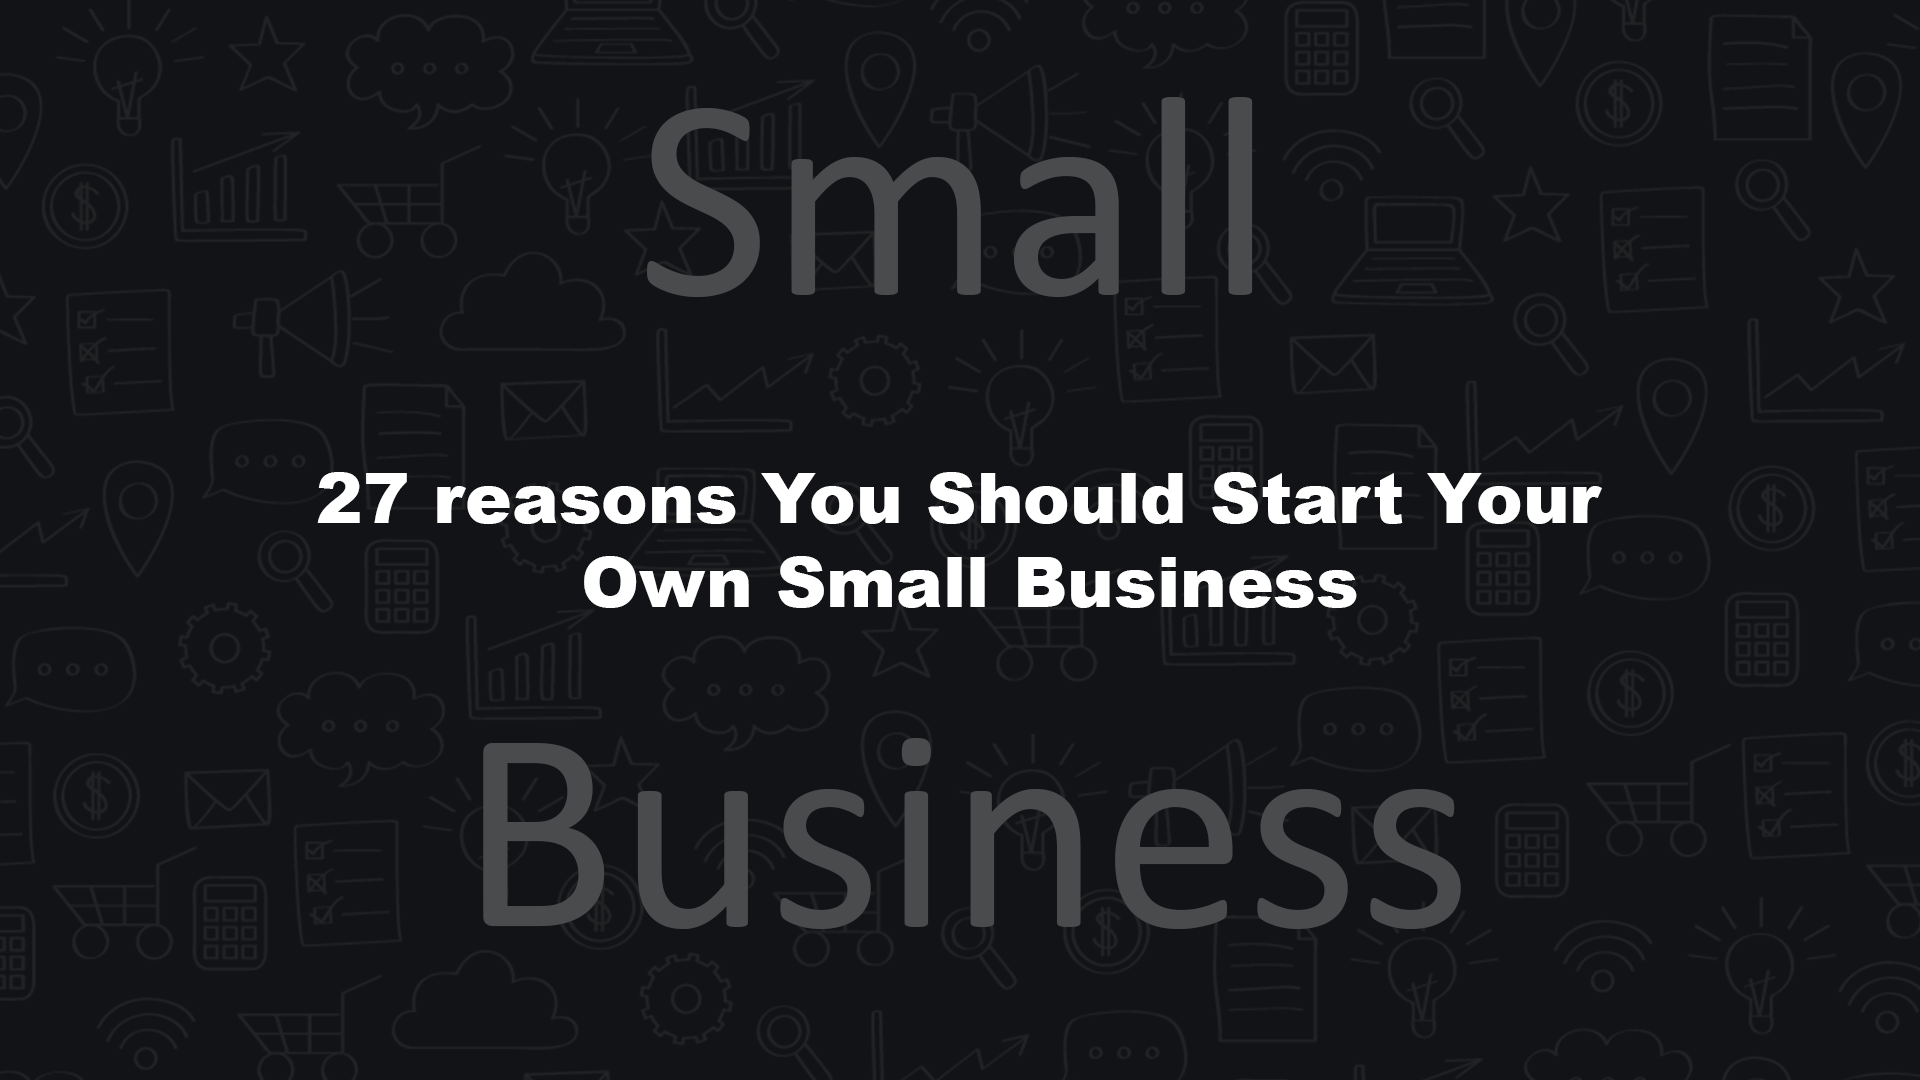 27 reasons You Should Start Your Own Small Business